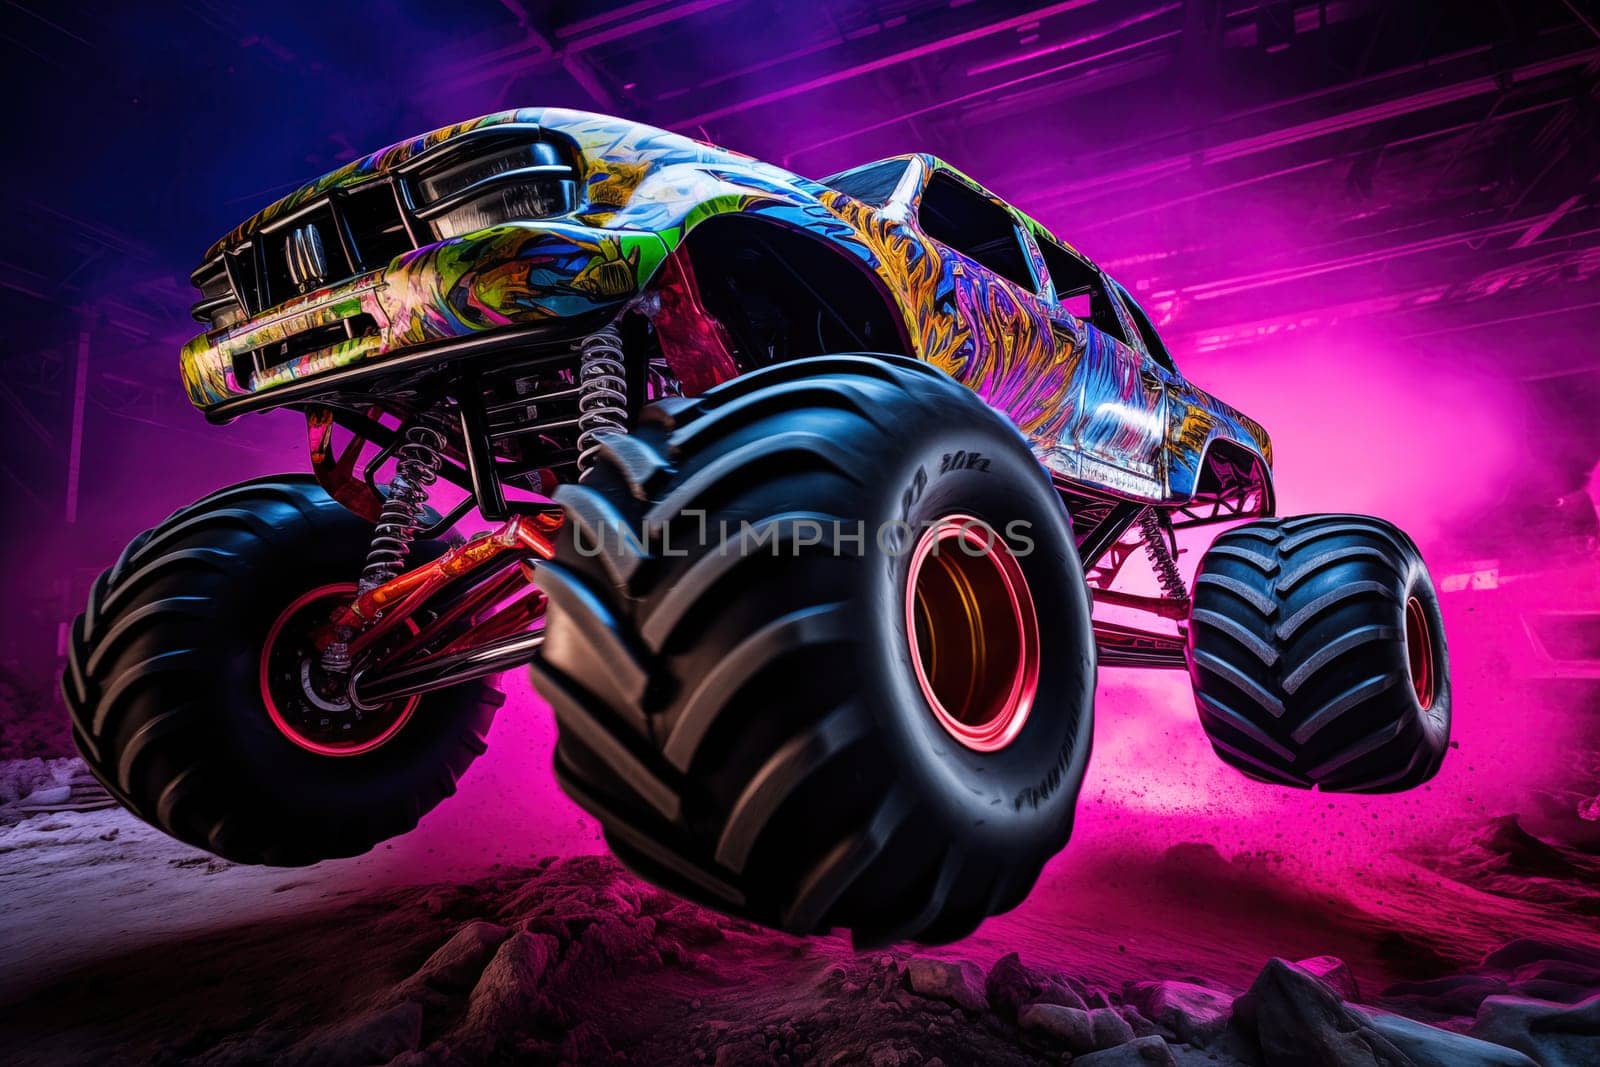 Monster truck with neon lighting, jumping off-road in cloud of dust. Excitement and thrill of an extreme sport